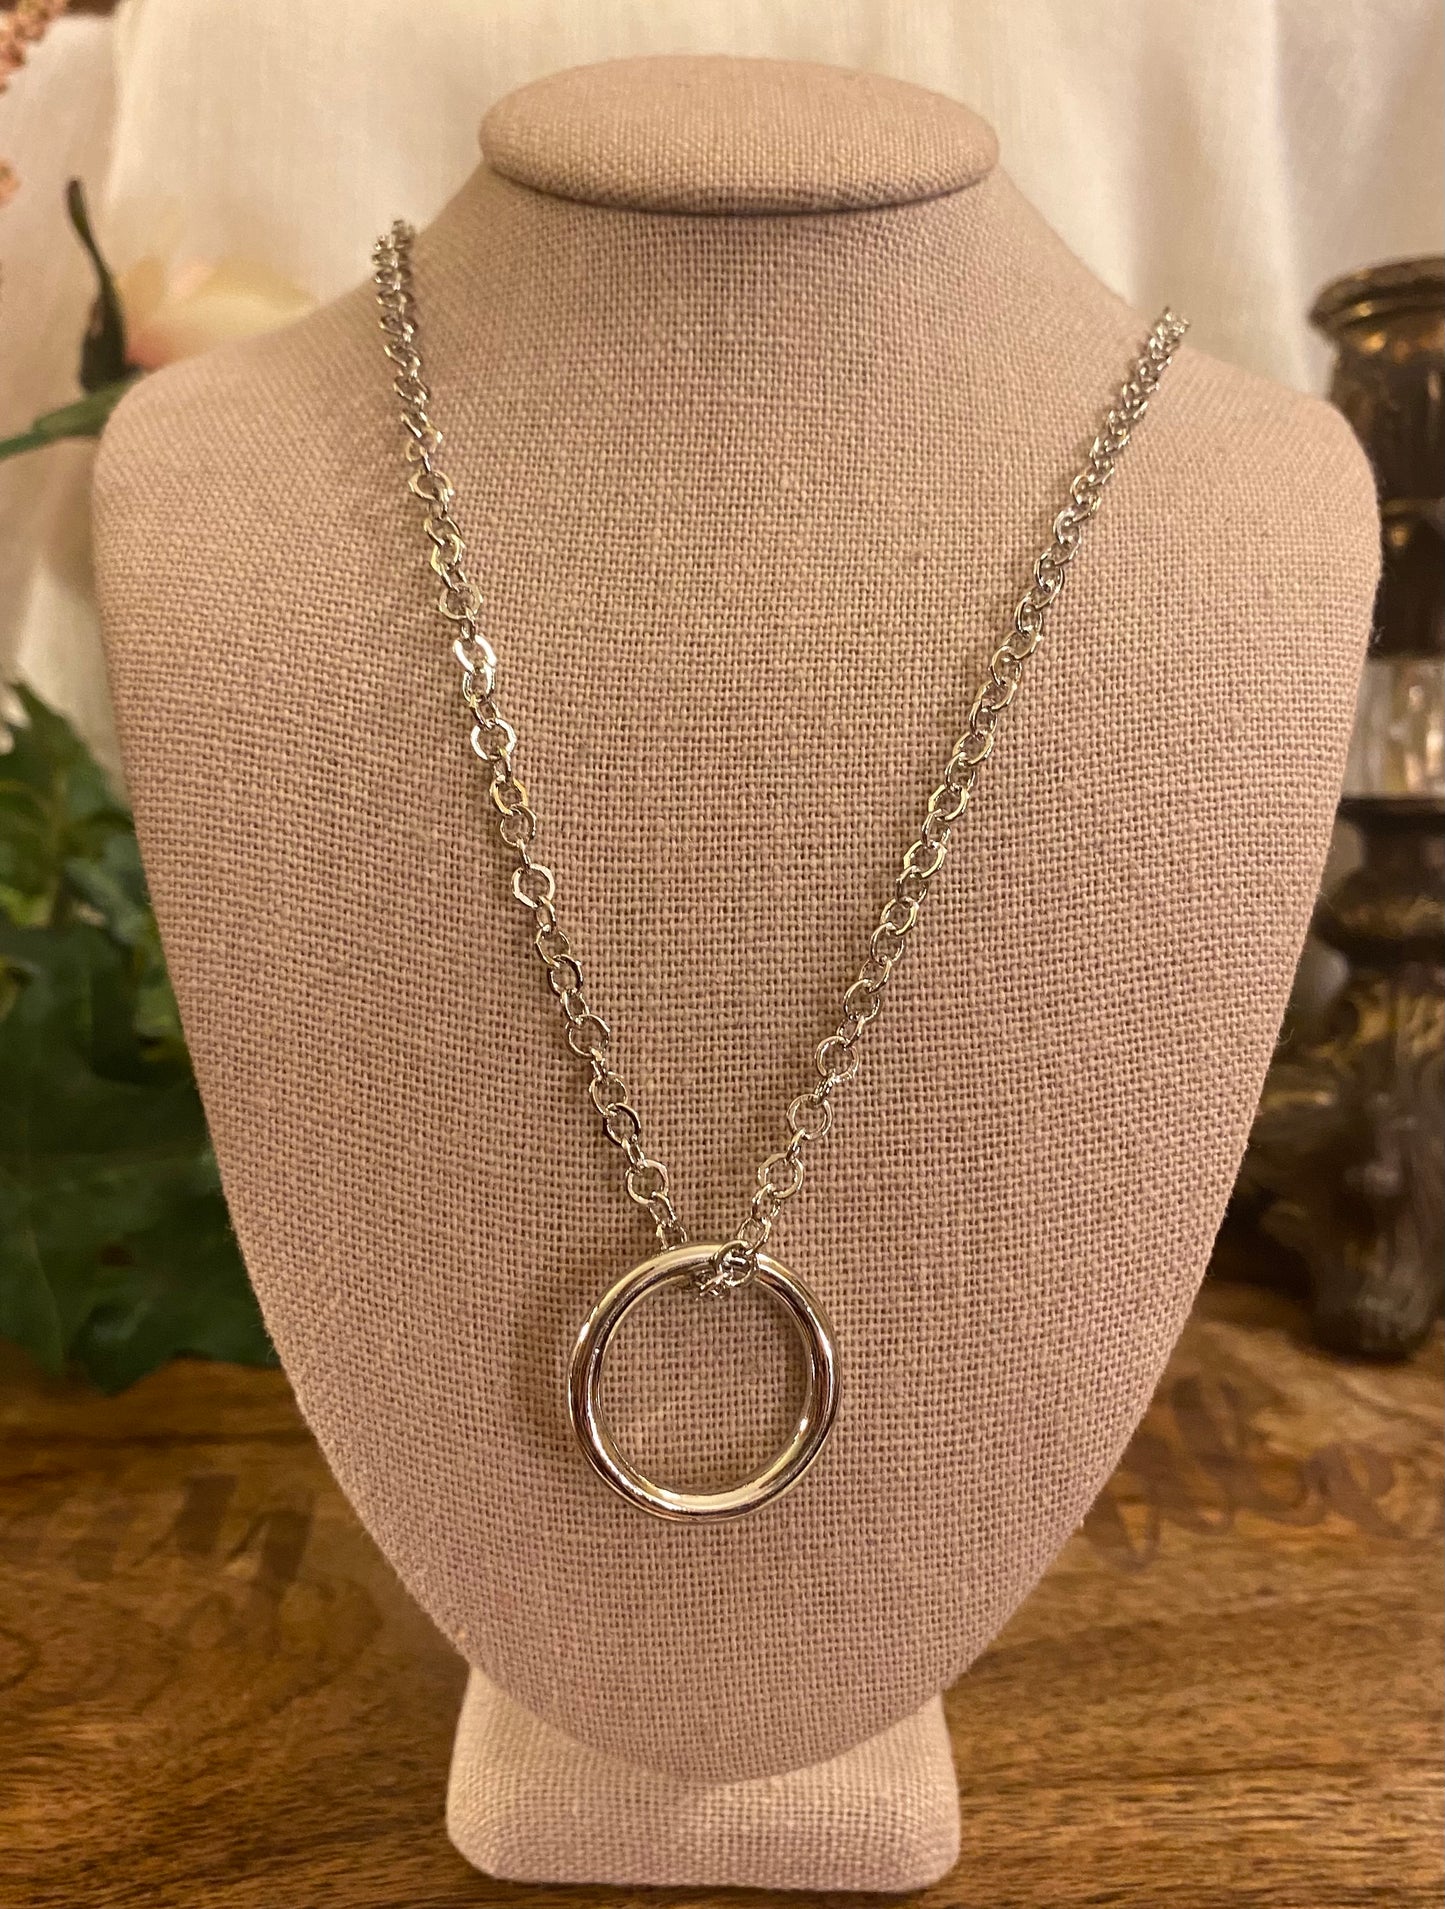 Silver Short Metal Necklace Featuring Circle Pendant